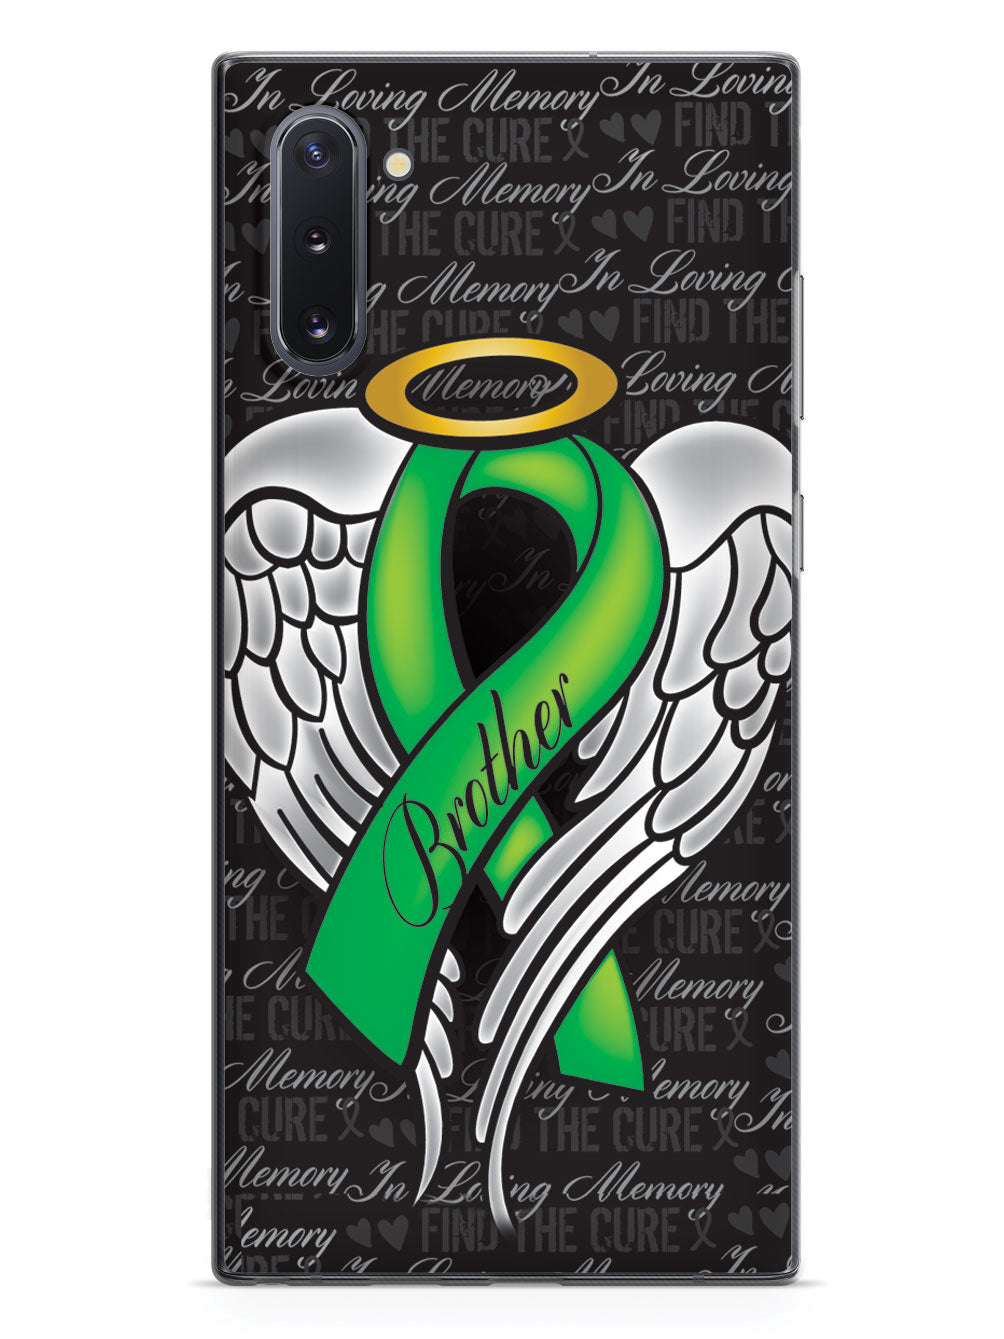 In Loving Memory of My Brother - Green Ribbon Case